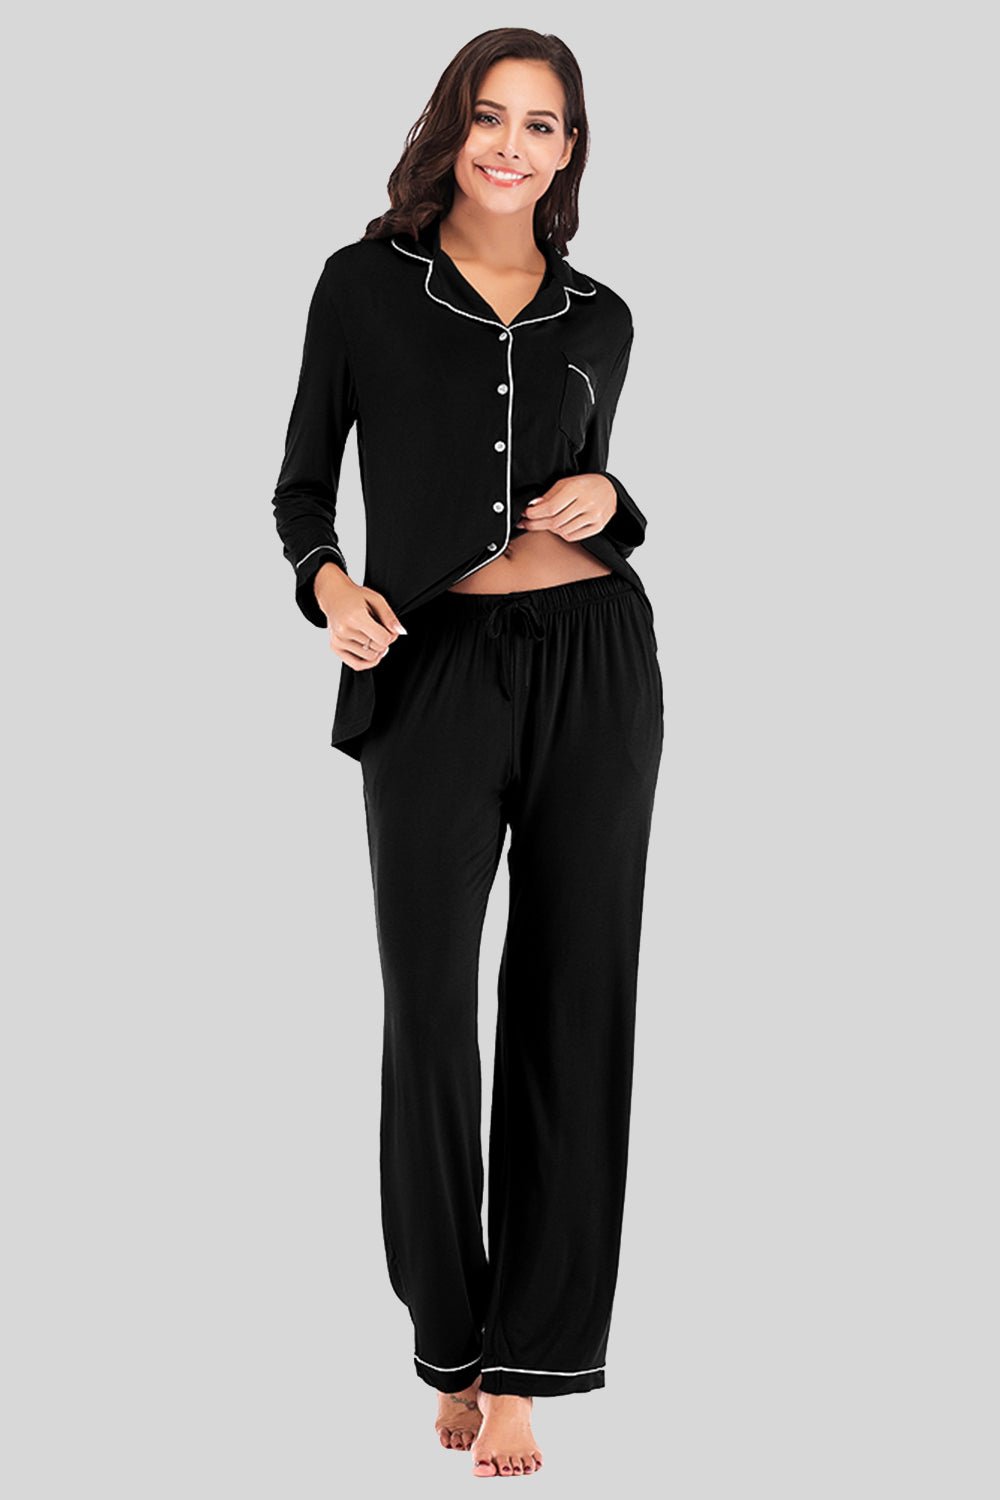 Collared Neck Long Sleeve Loungewear Set with Pockets - OMG! Rose